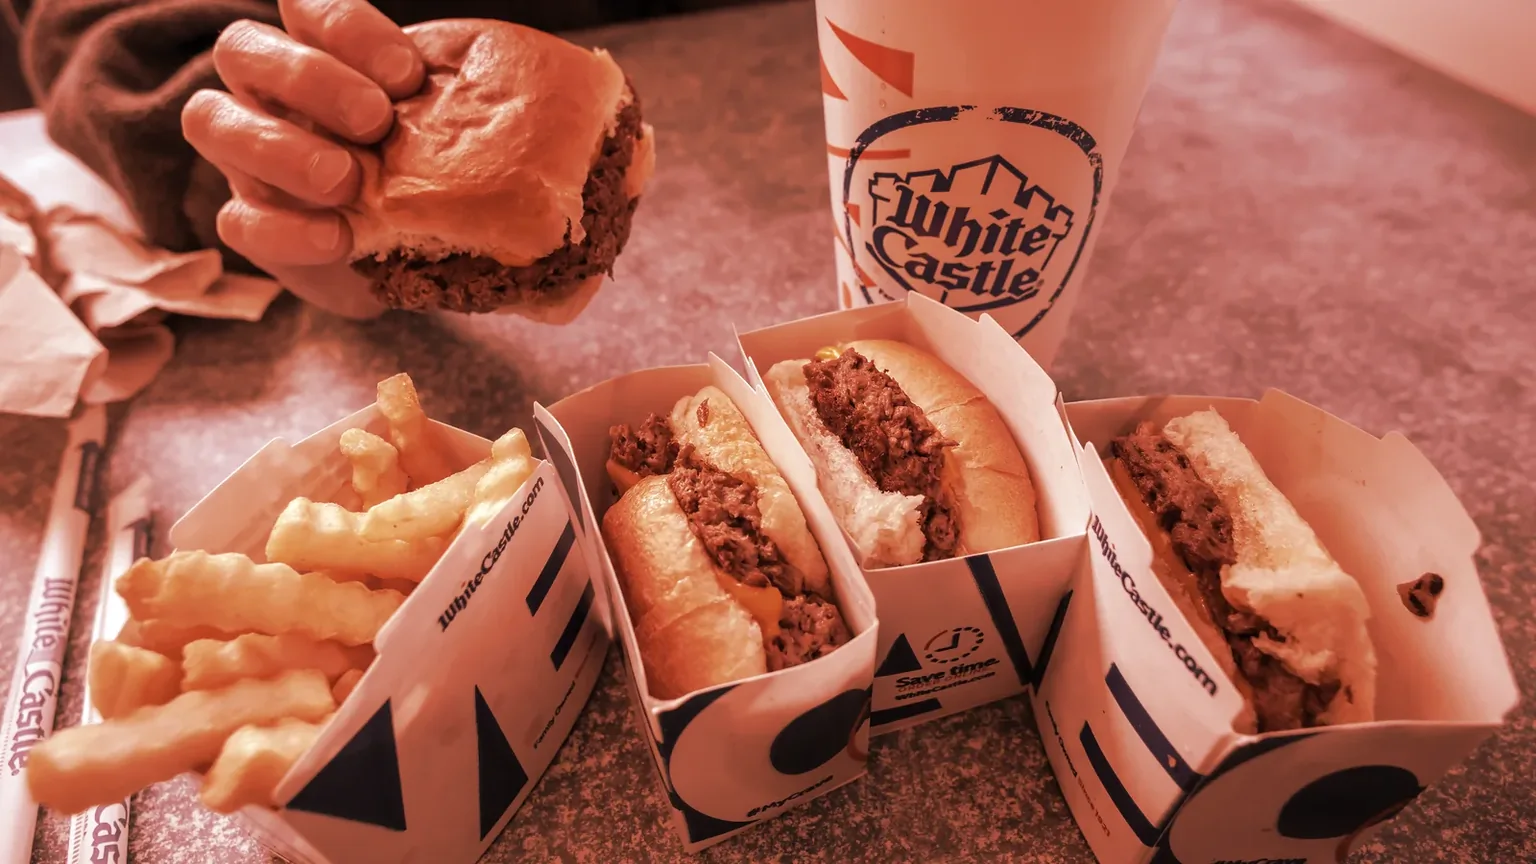 White Castle is the latest brand to join crypto. Image: Shutterstock